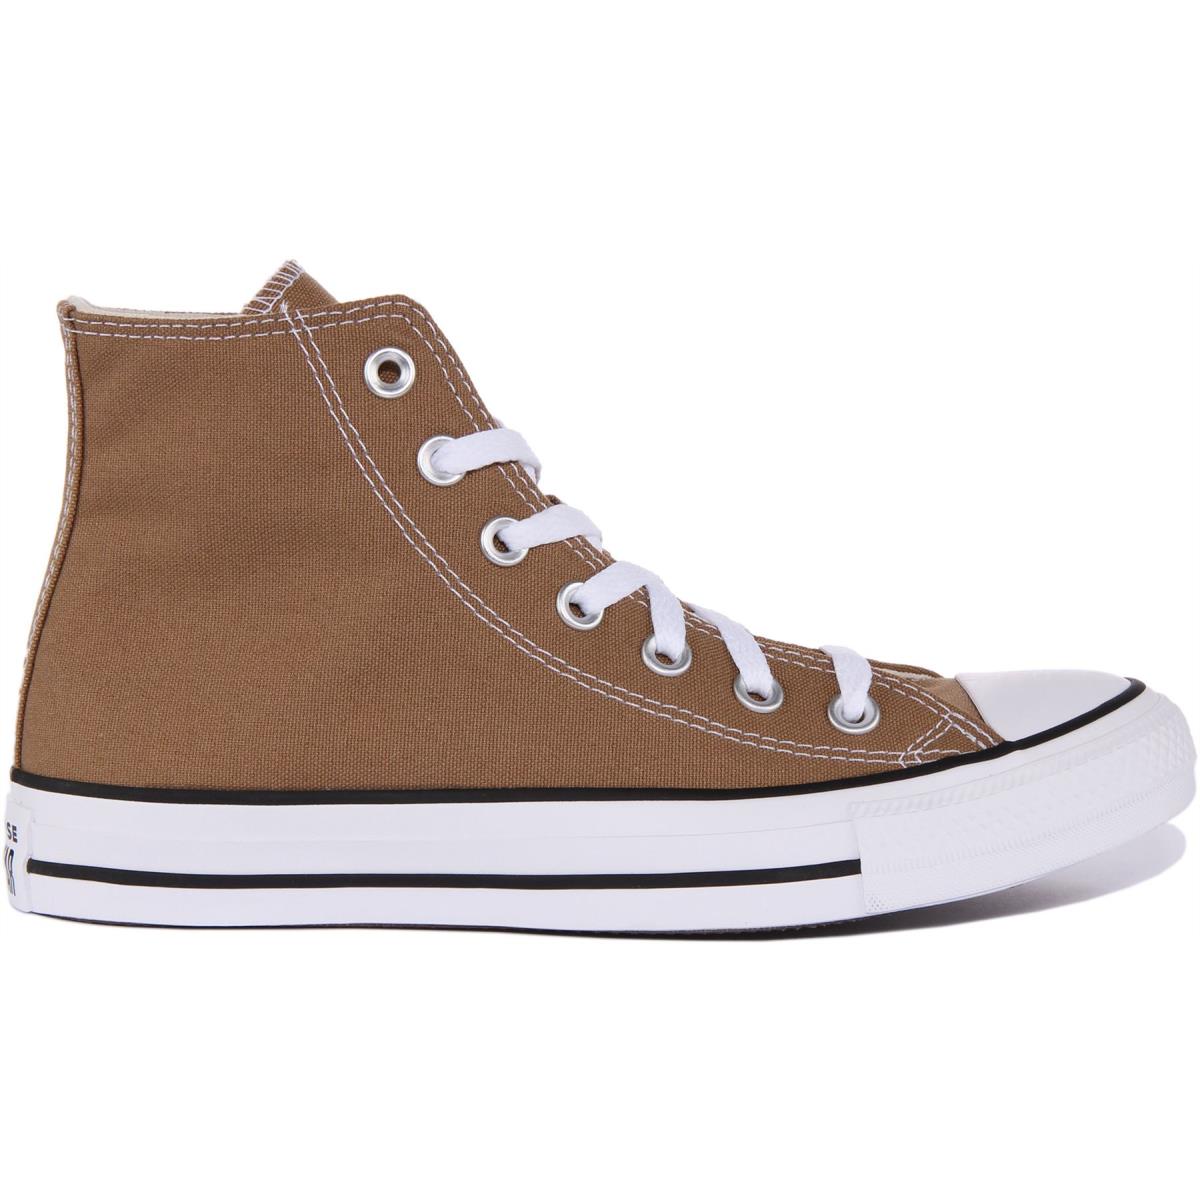 Converse A00786C Ct As Hi Unisex Canvas Sneakers In Brown Size US 7 - 13